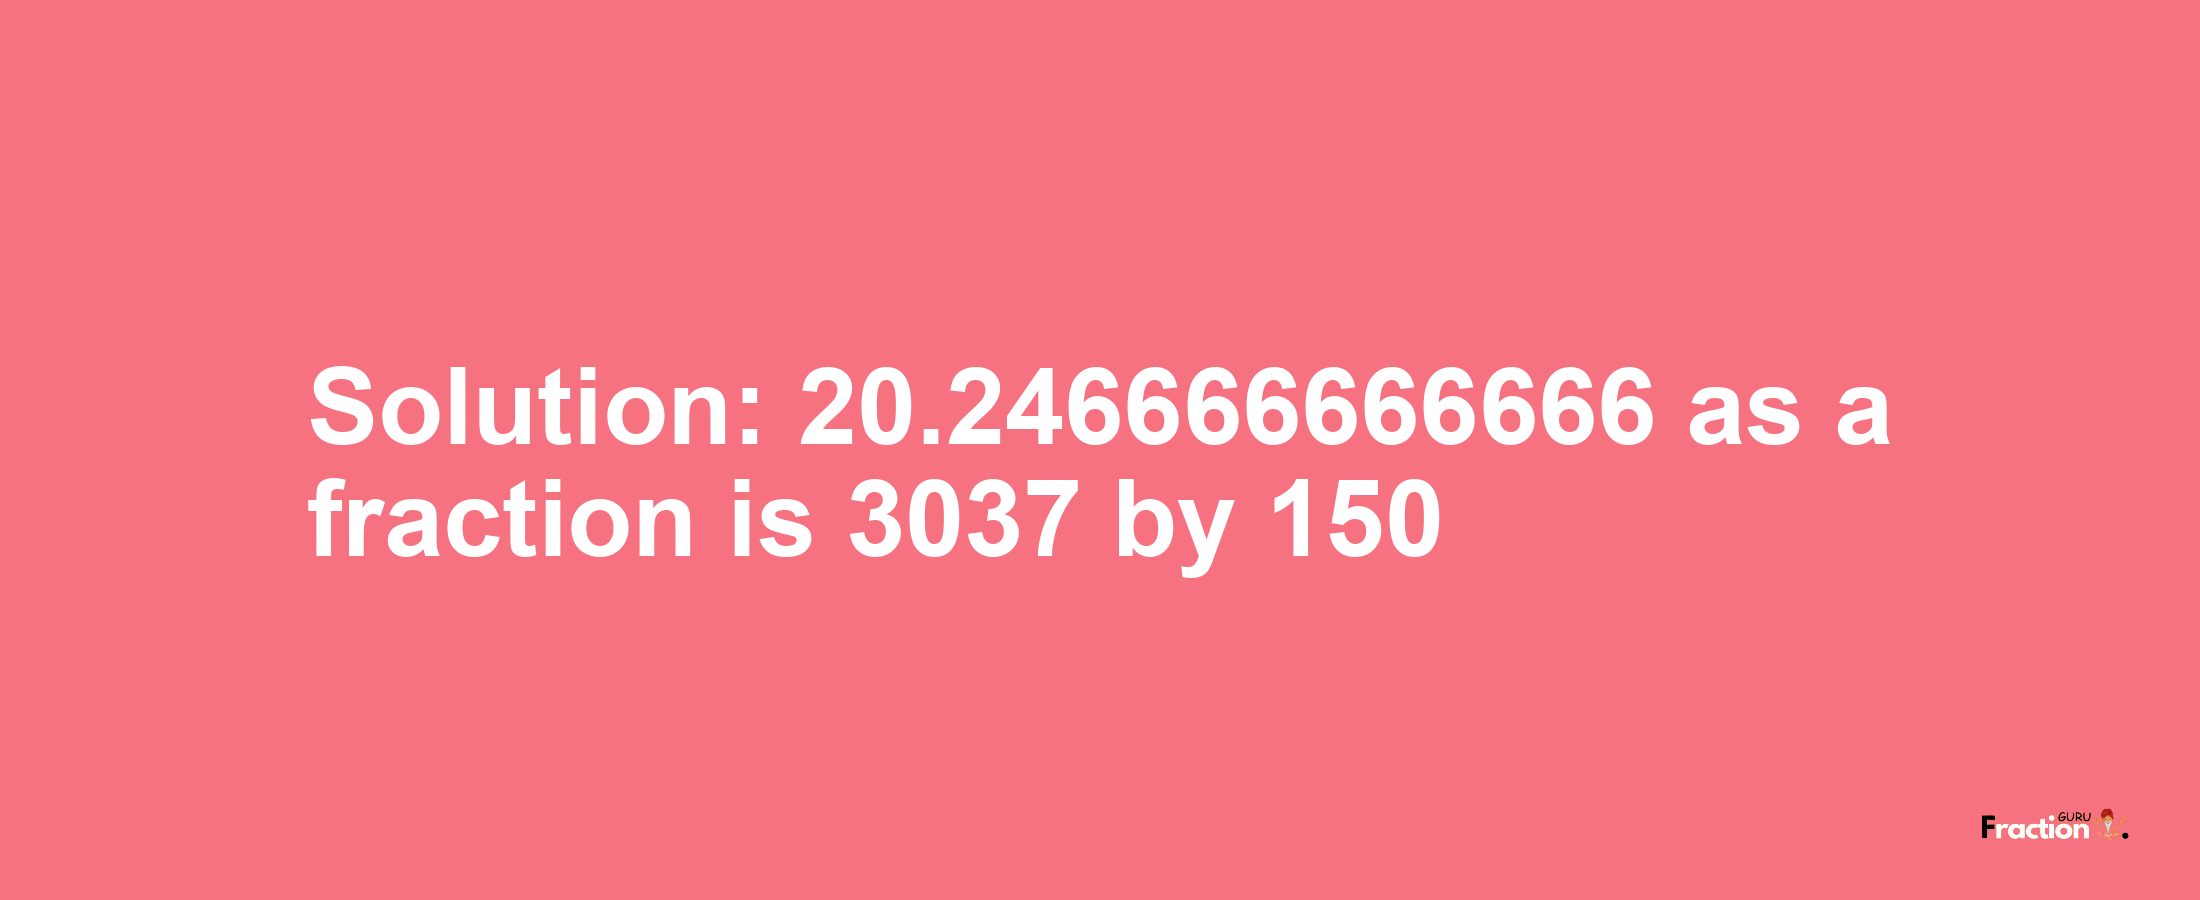 Solution:20.246666666666 as a fraction is 3037/150